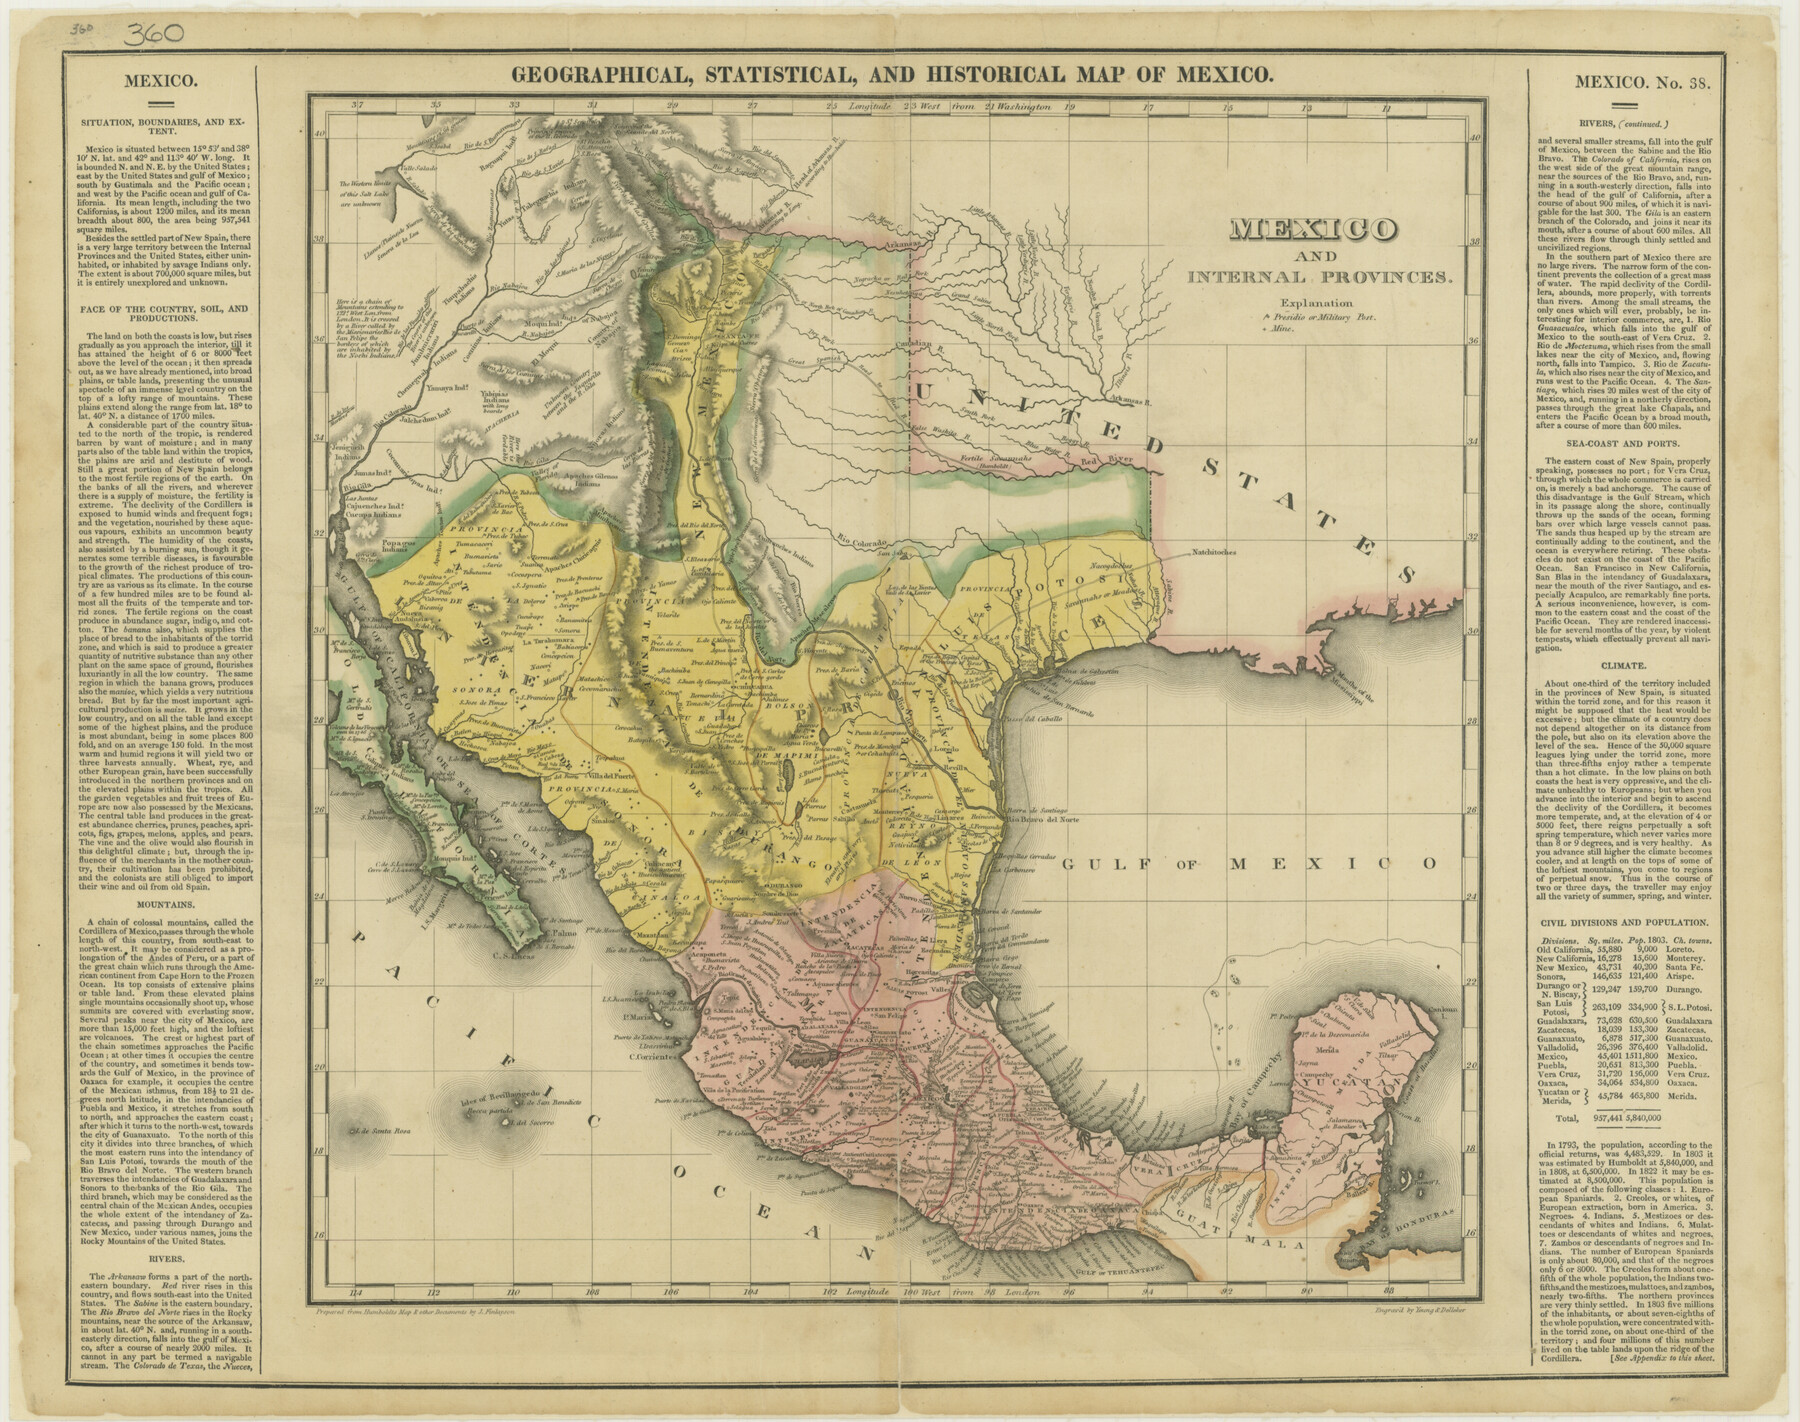 76189, Mexico and Internal Provinces, Texas State Library and Archives